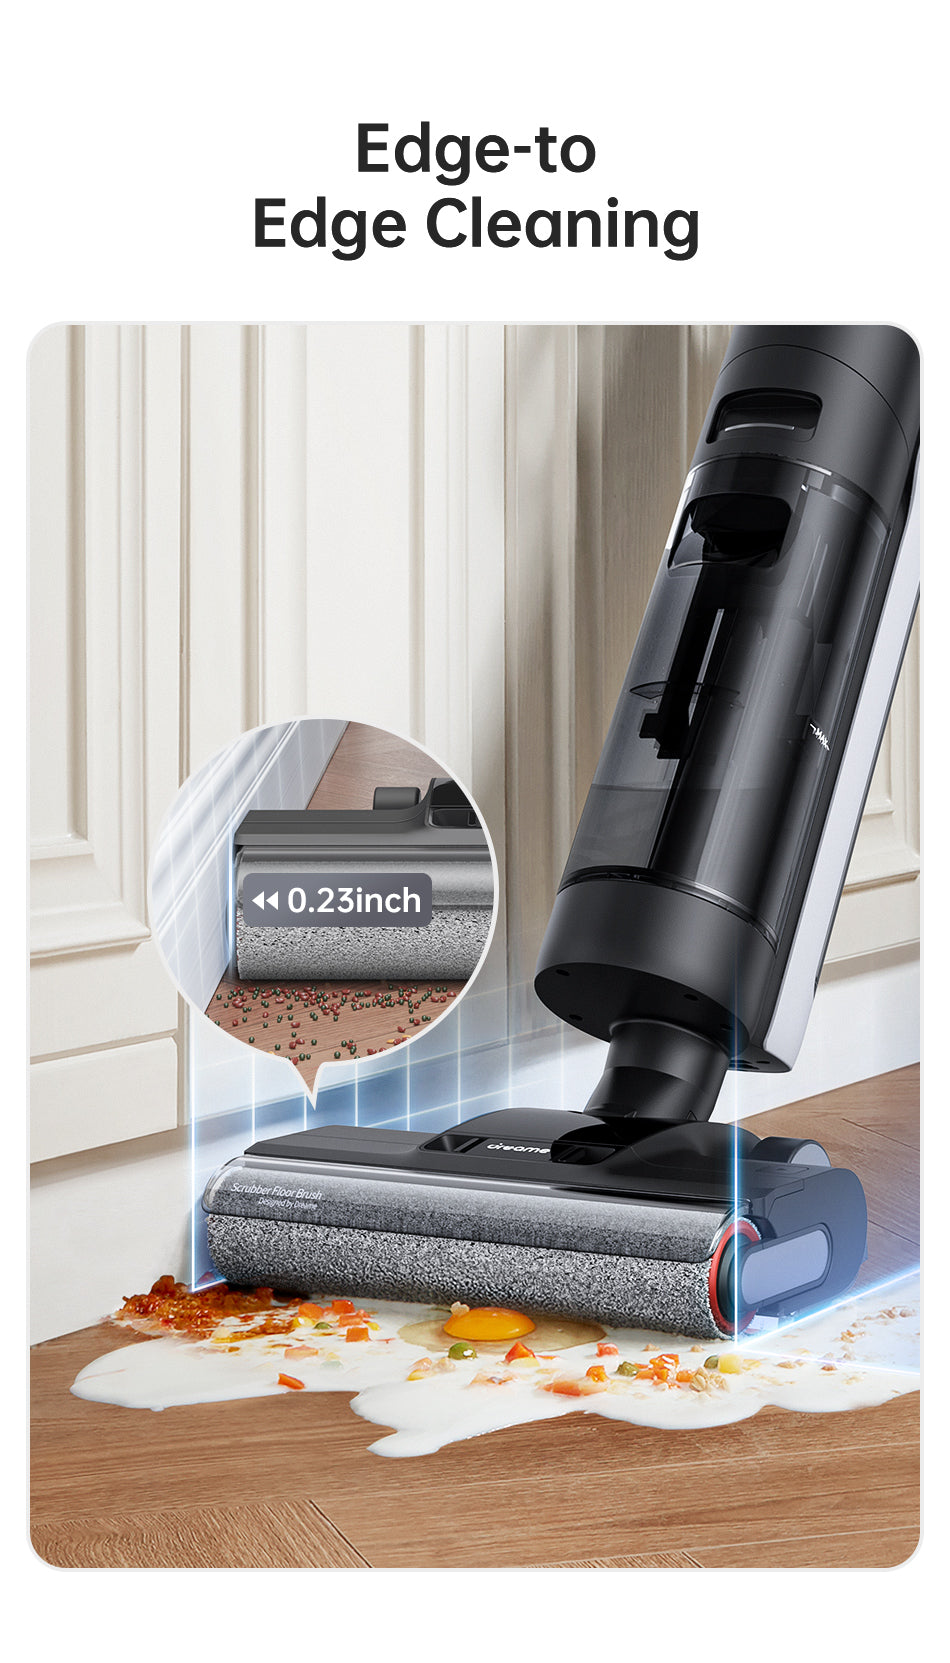 DREAME H12 Pro Wet Dry Vacuum Cleaner Wireless with Edge Cleaning